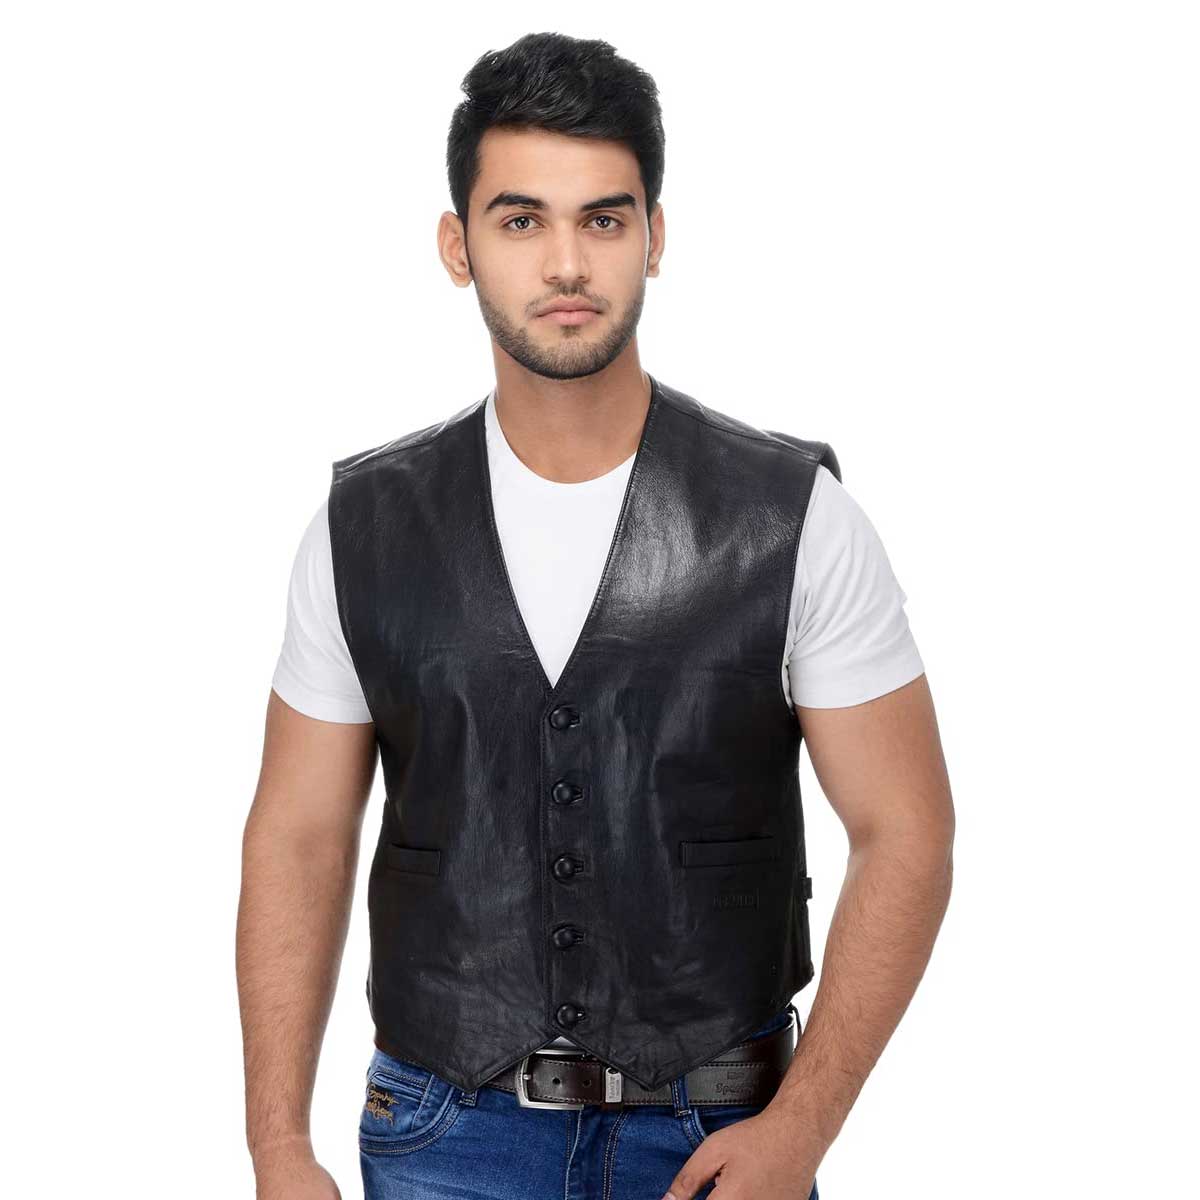 Leather Vest Manufacturers in Derby